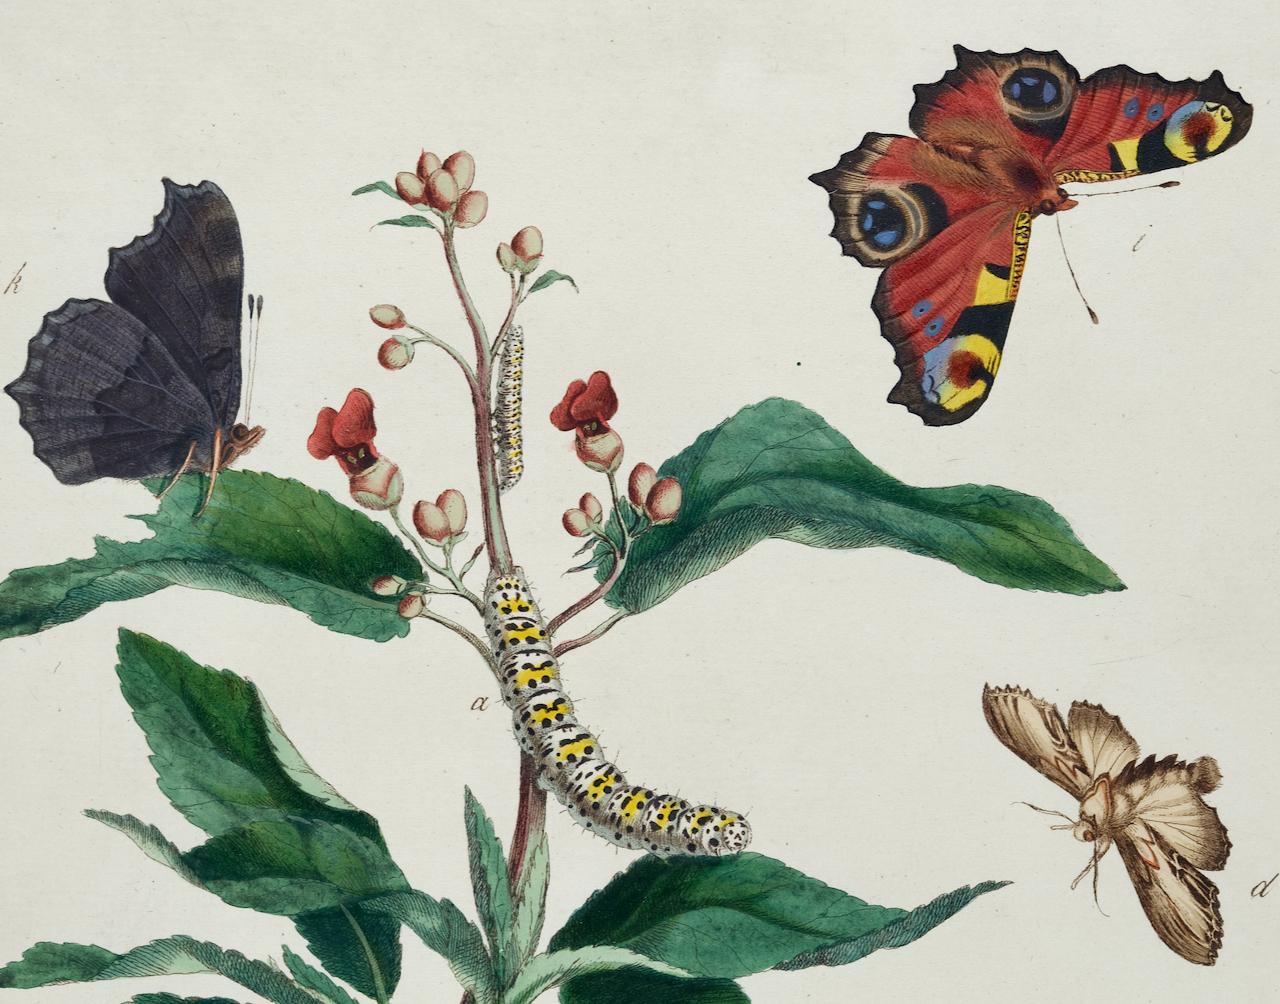 This is a rare, original first edition hand-colored engraving of Water Betony Moths and Peacock Butterflies, which is plate 8 from Moses Harris's publication 